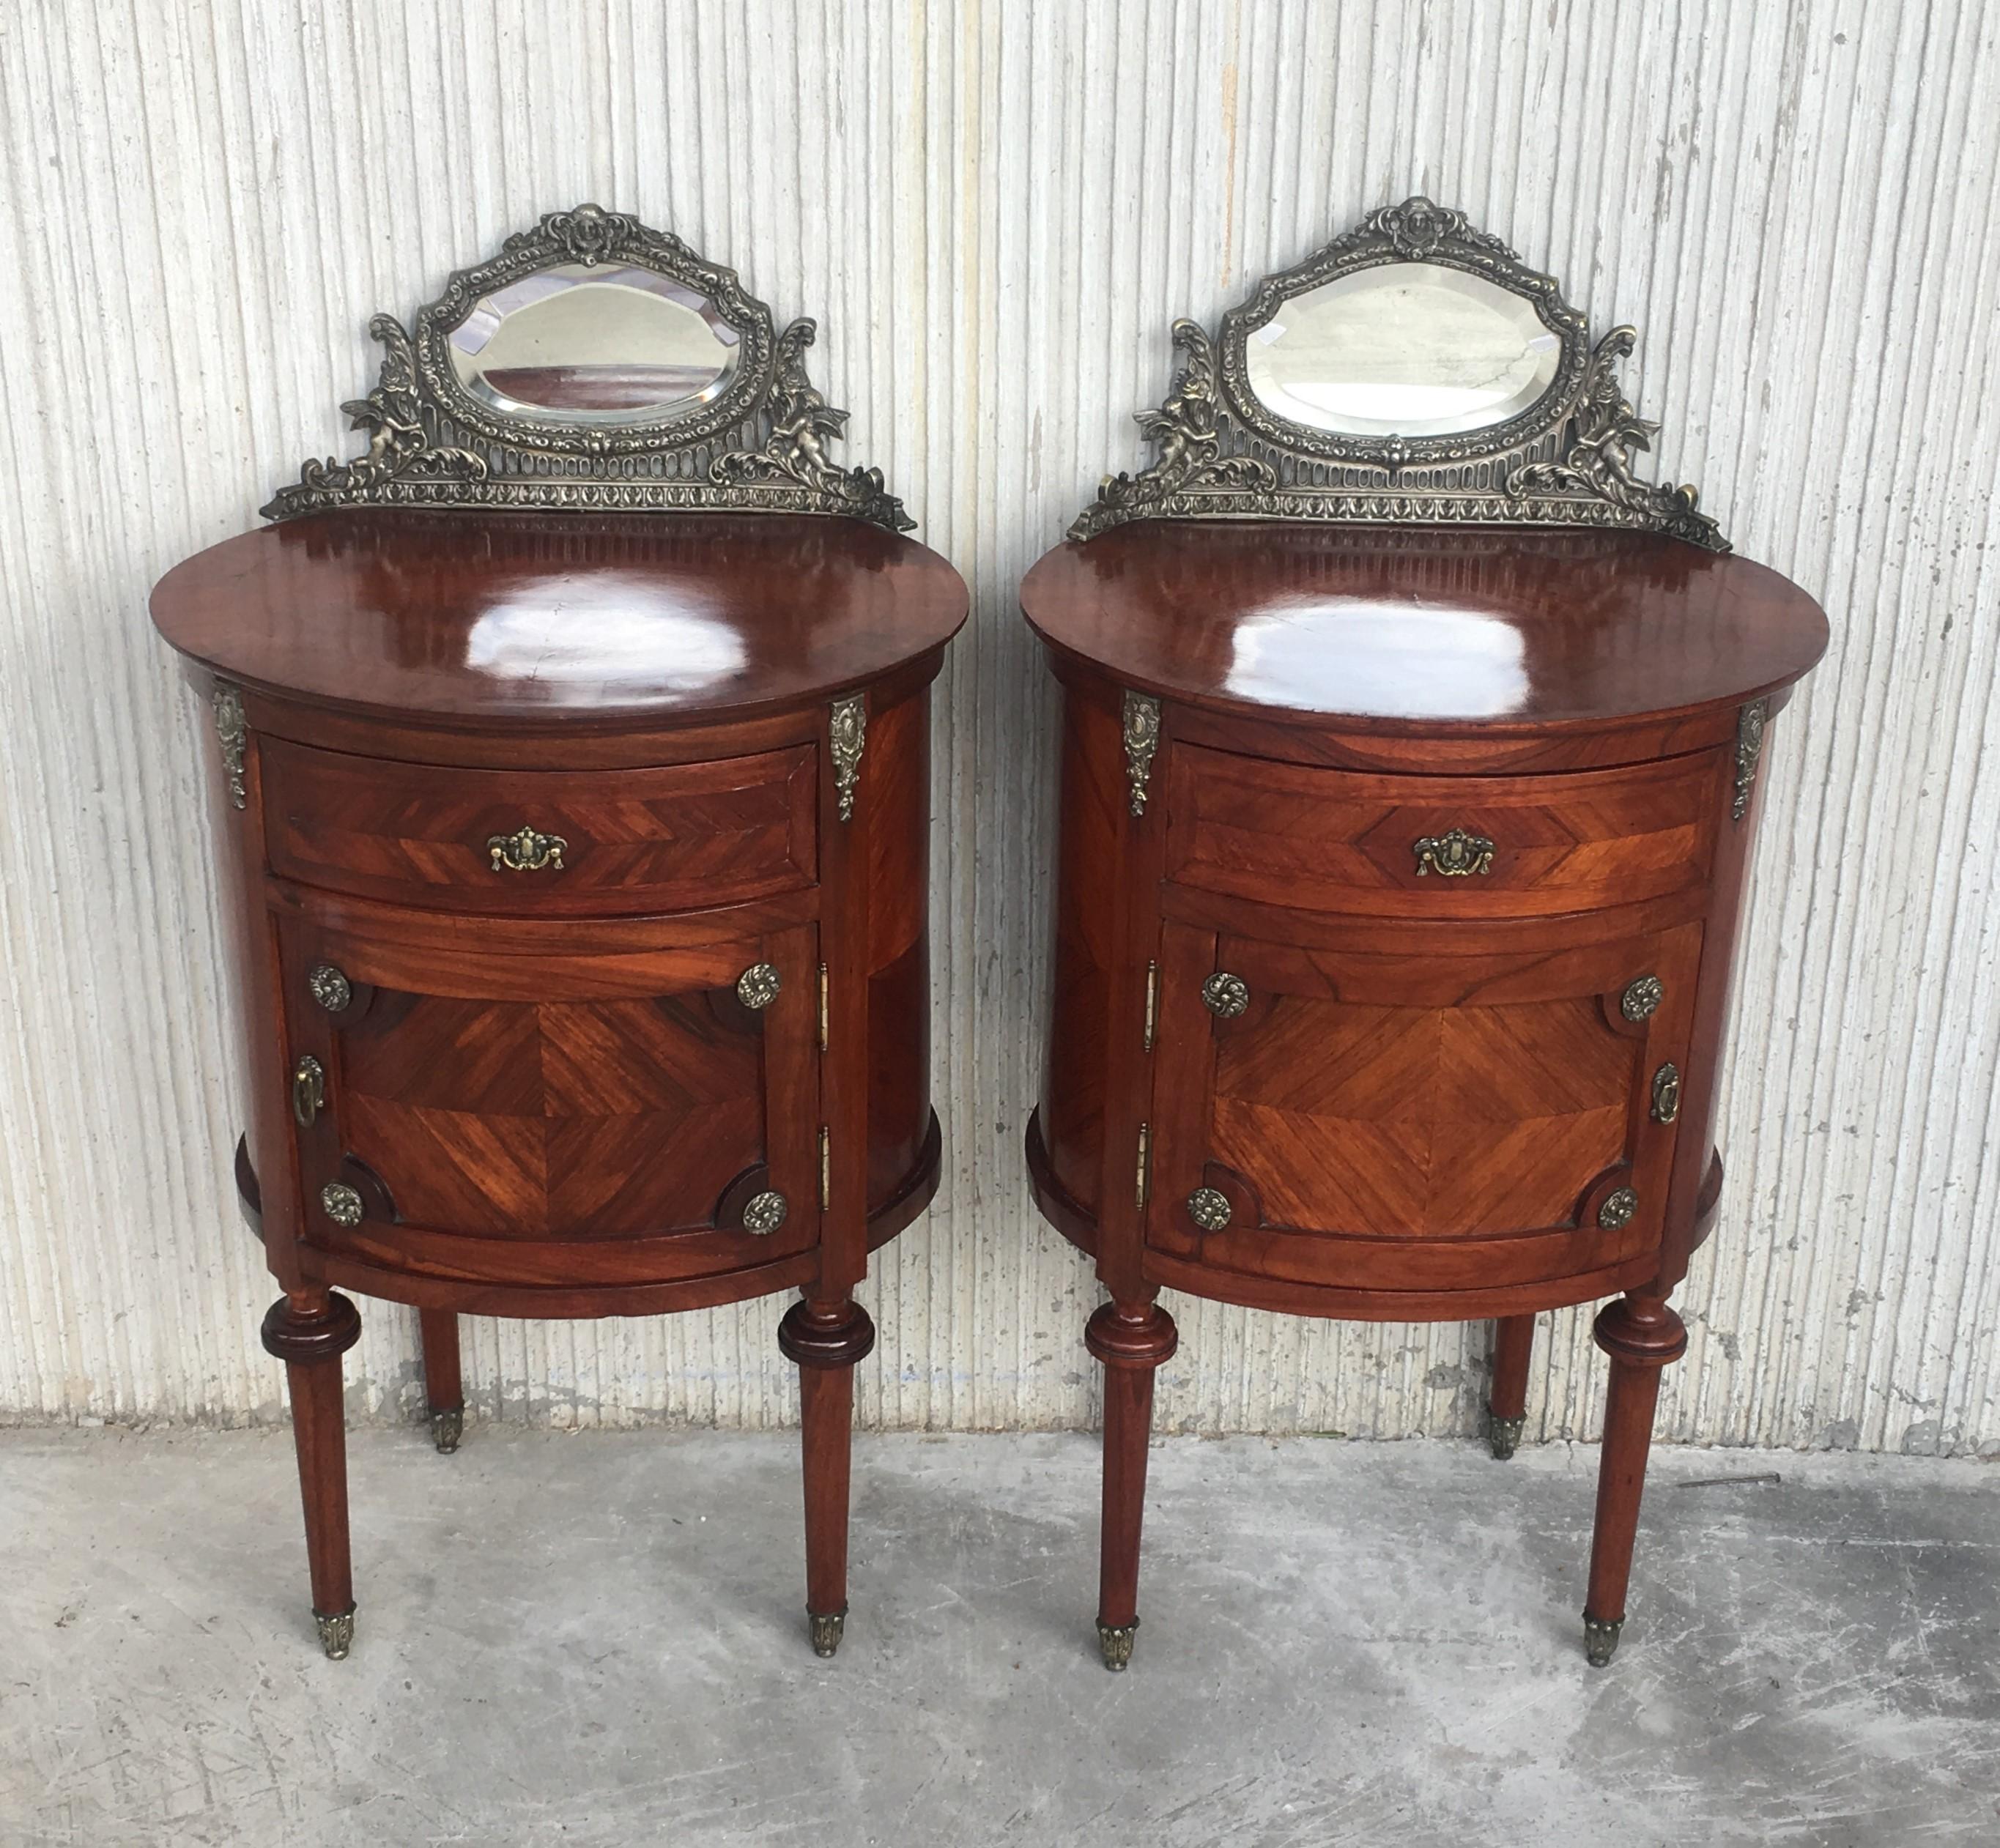 Louis XVI style pair of marquetry nightstands with metal crest one drawer and one compartment.
Originals handles and garniture.
Price per item

Total height: 39 in
Height to the tabletop: 33 in.